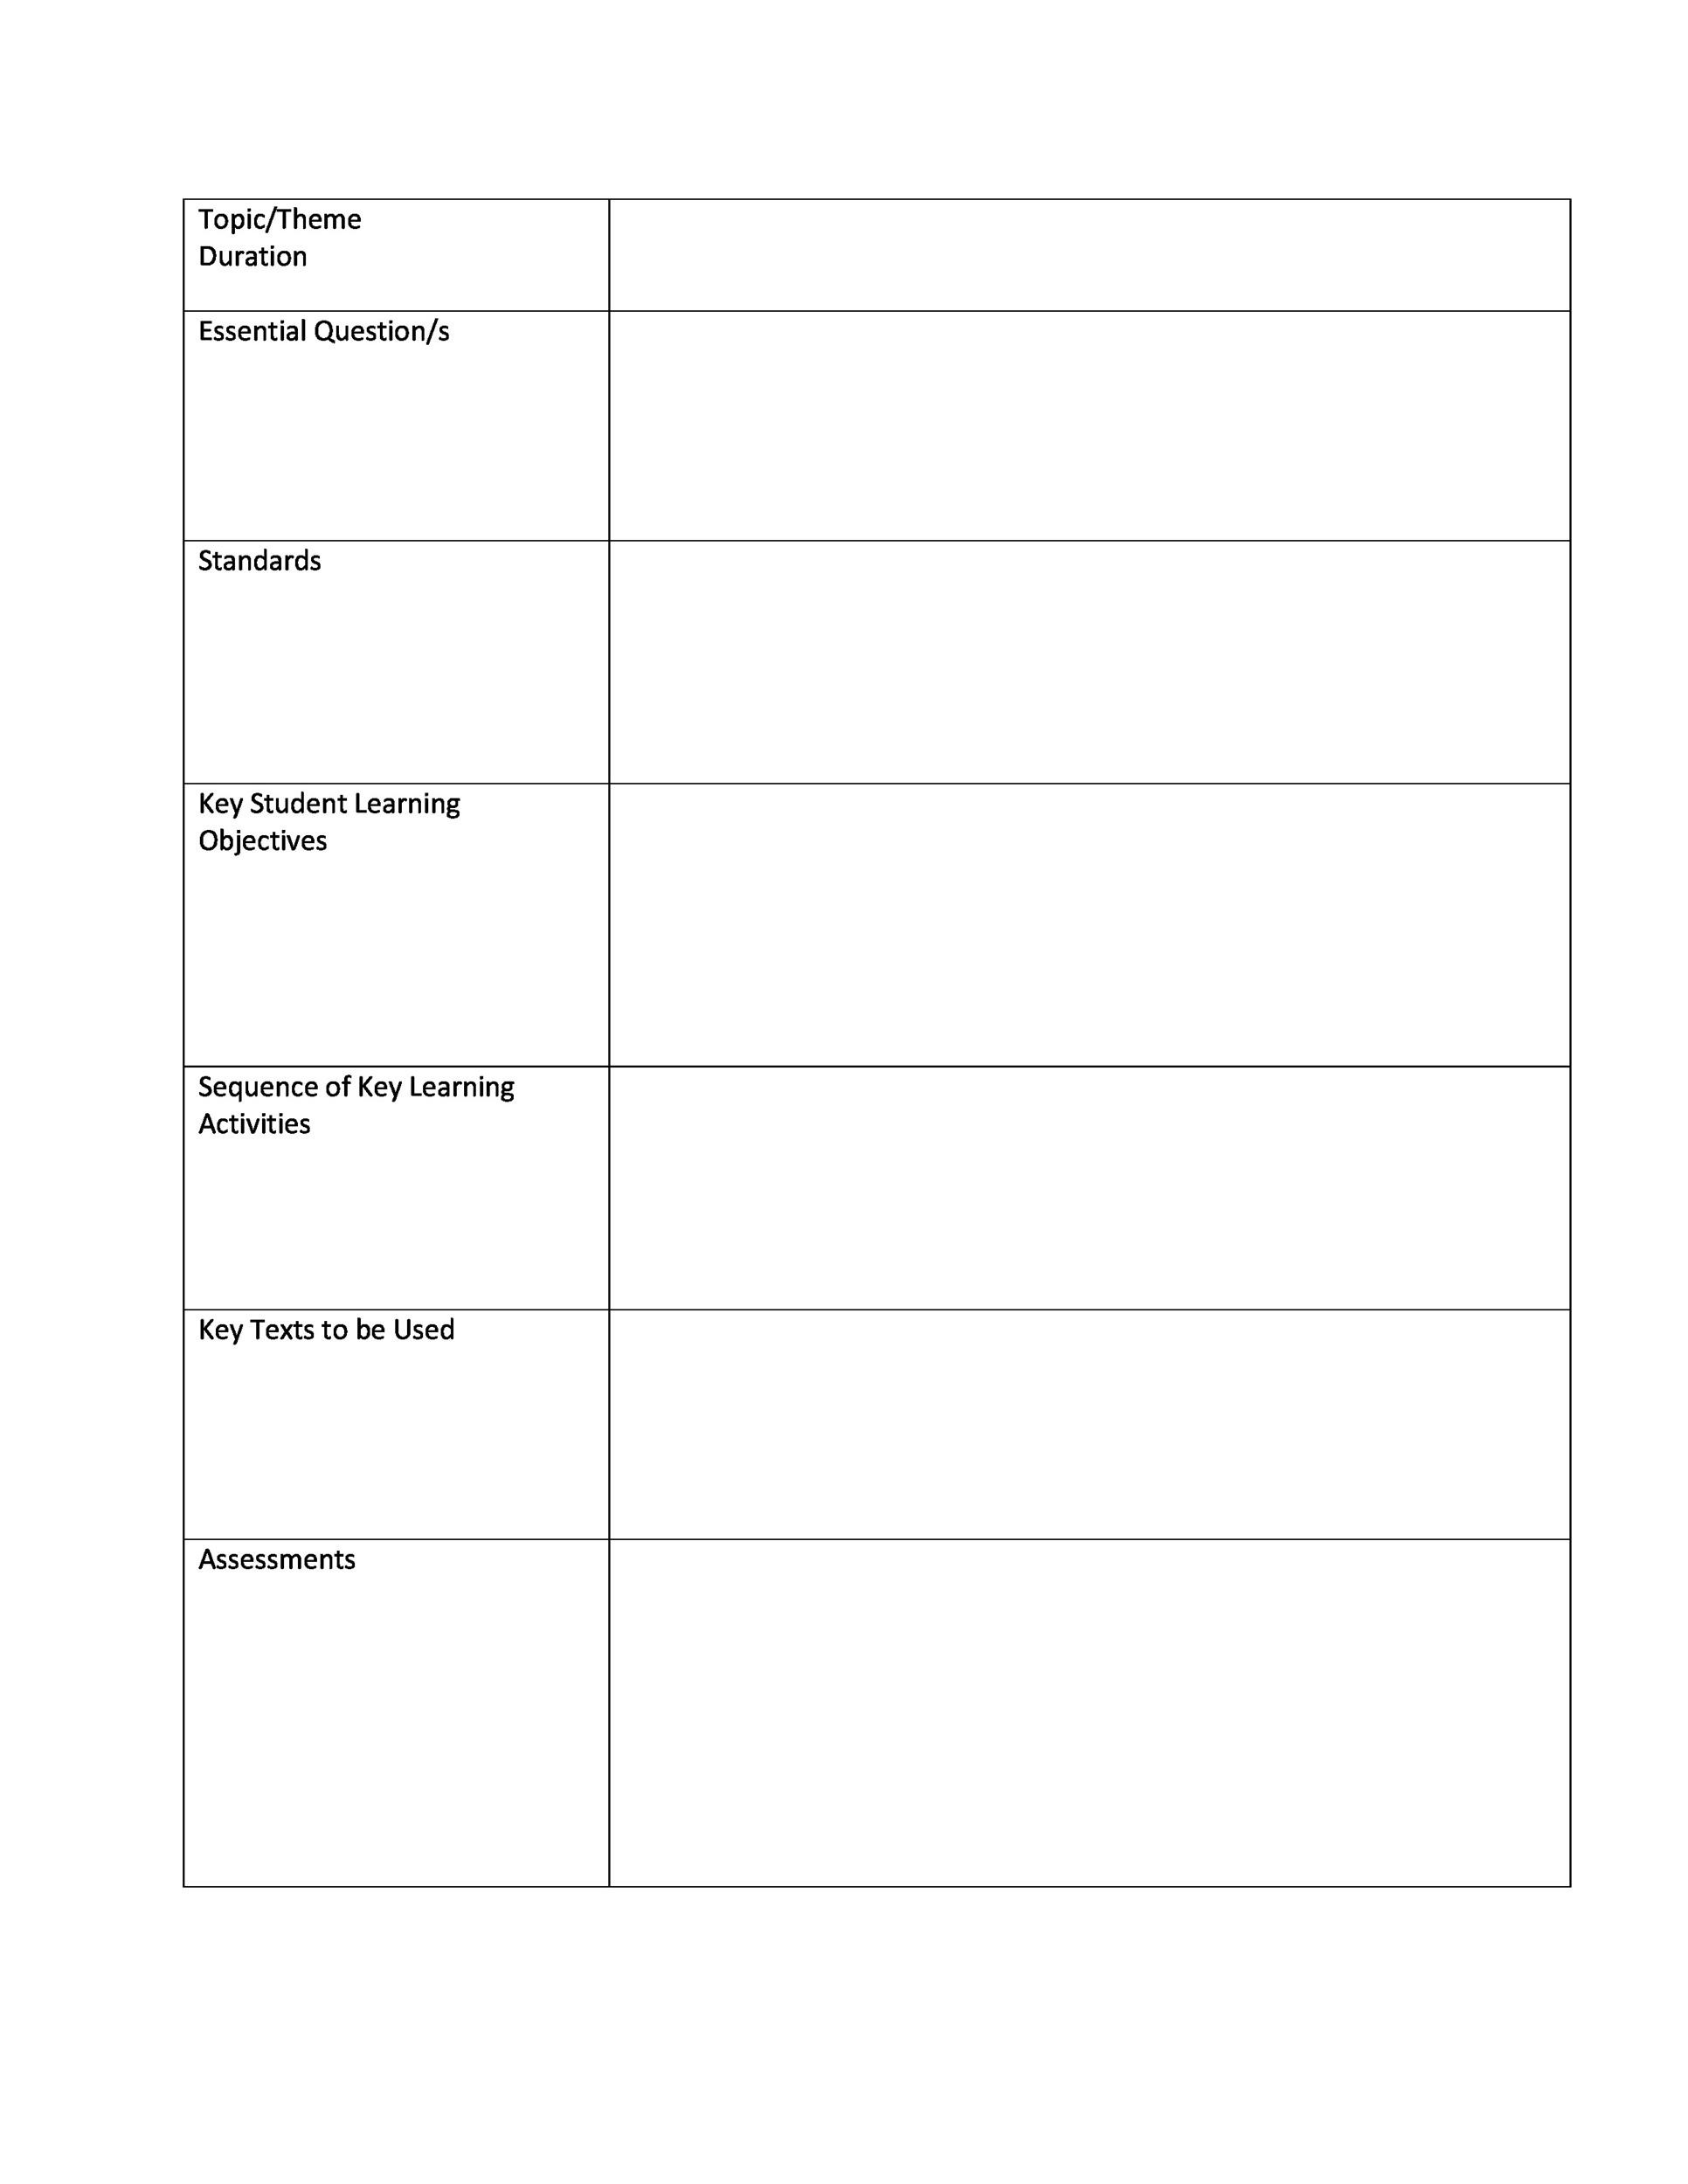 Lesson Plan Template Word Editable from templatelab.com